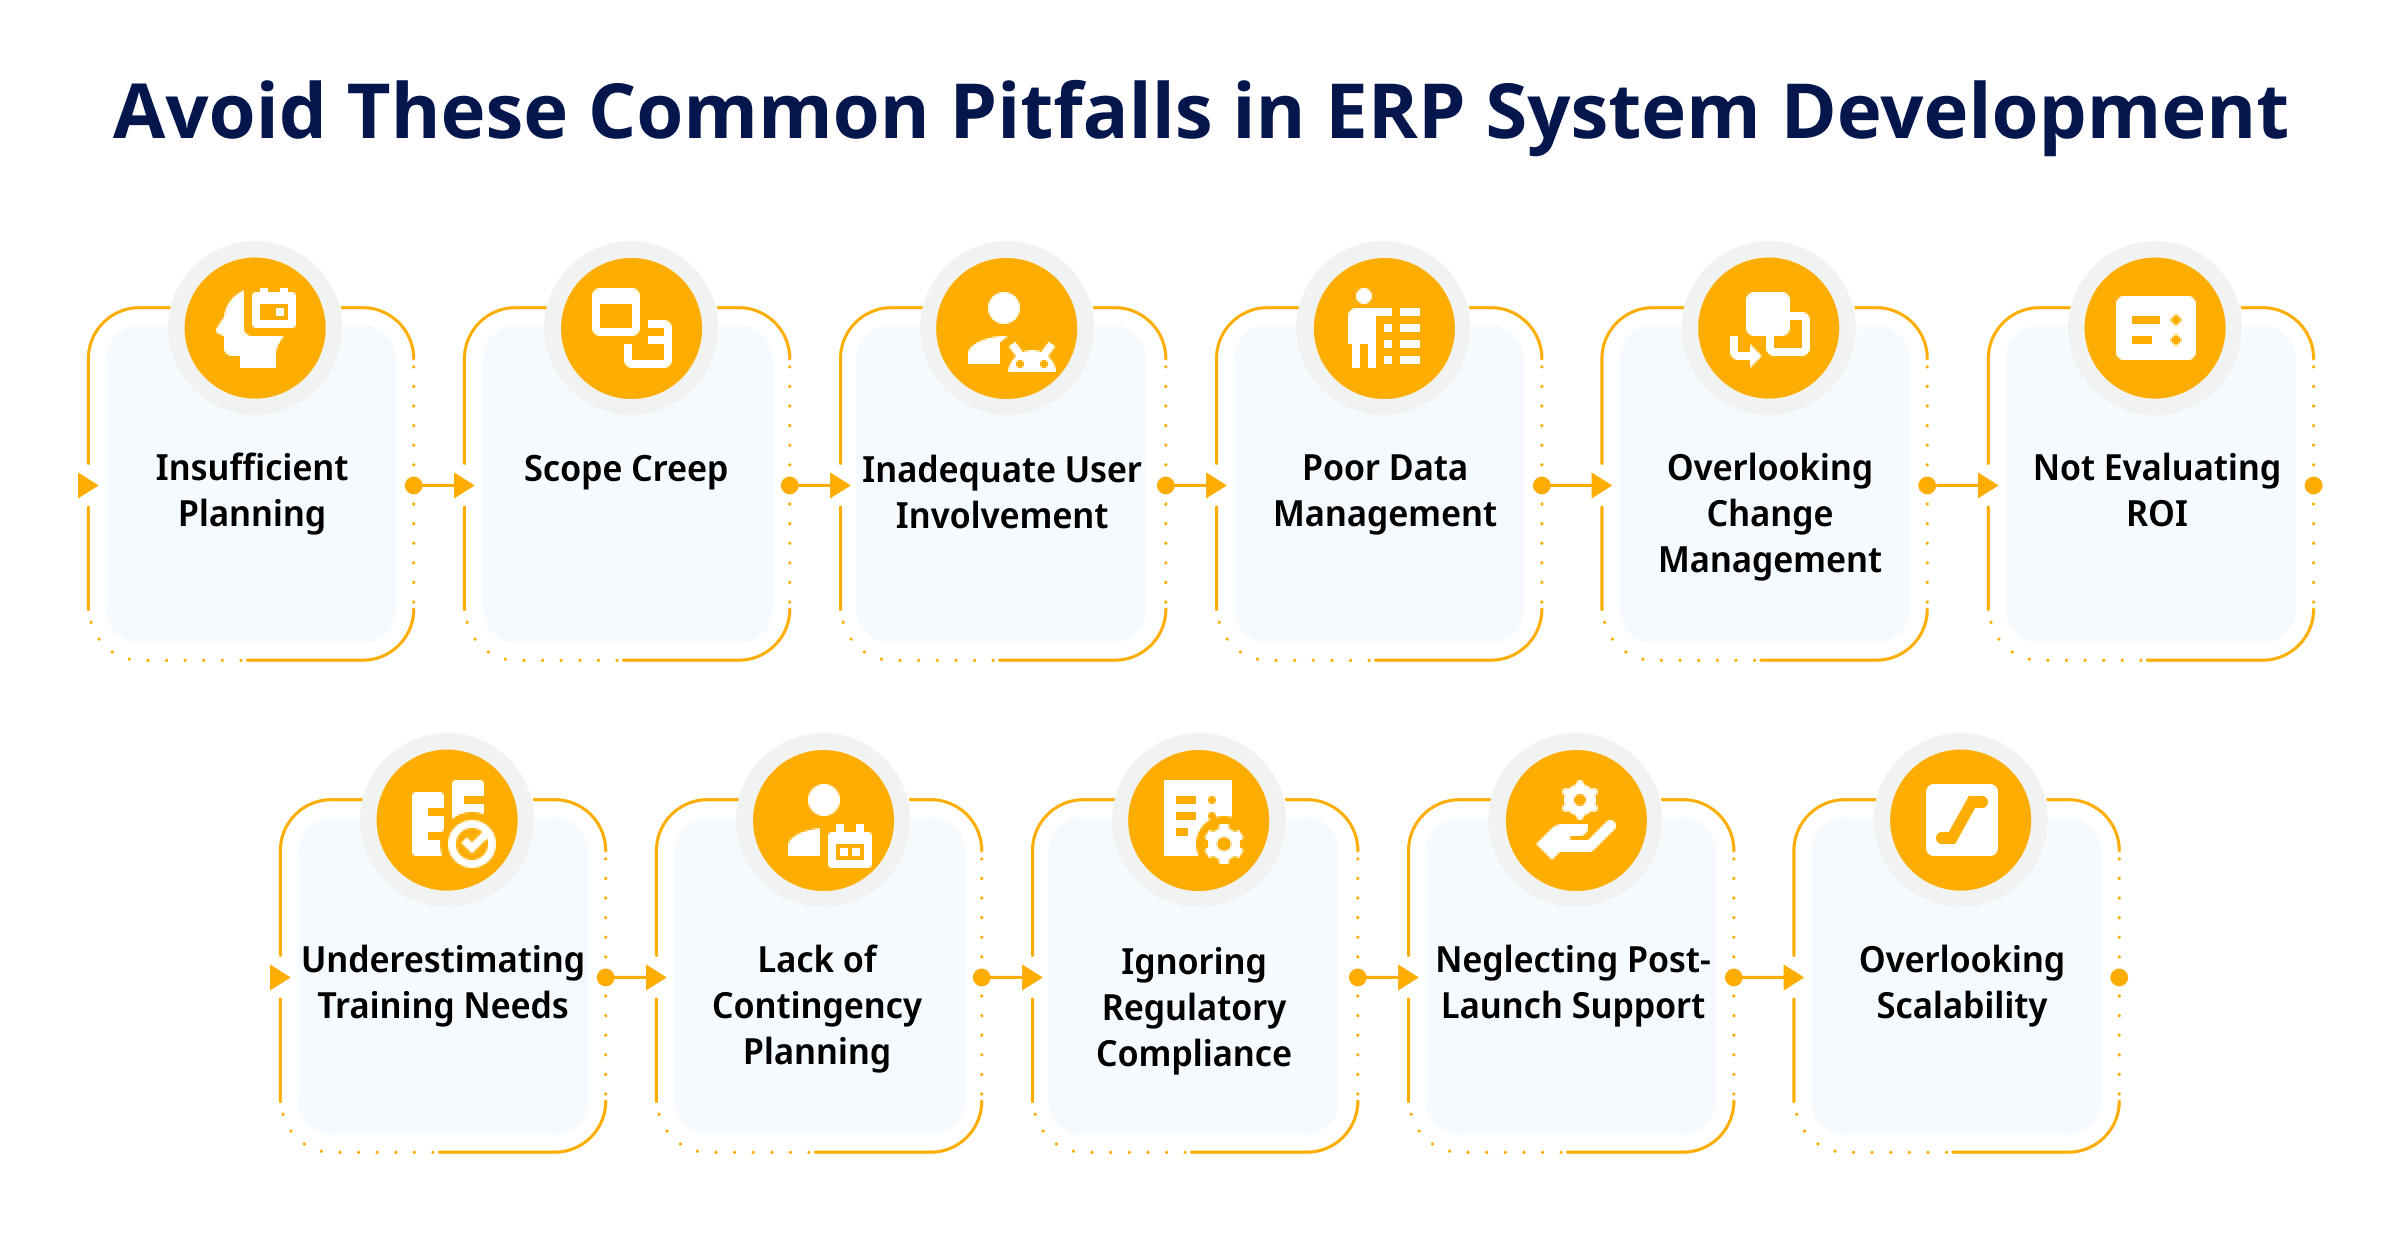 Avoid These Common Pitfalls in ERP System Development